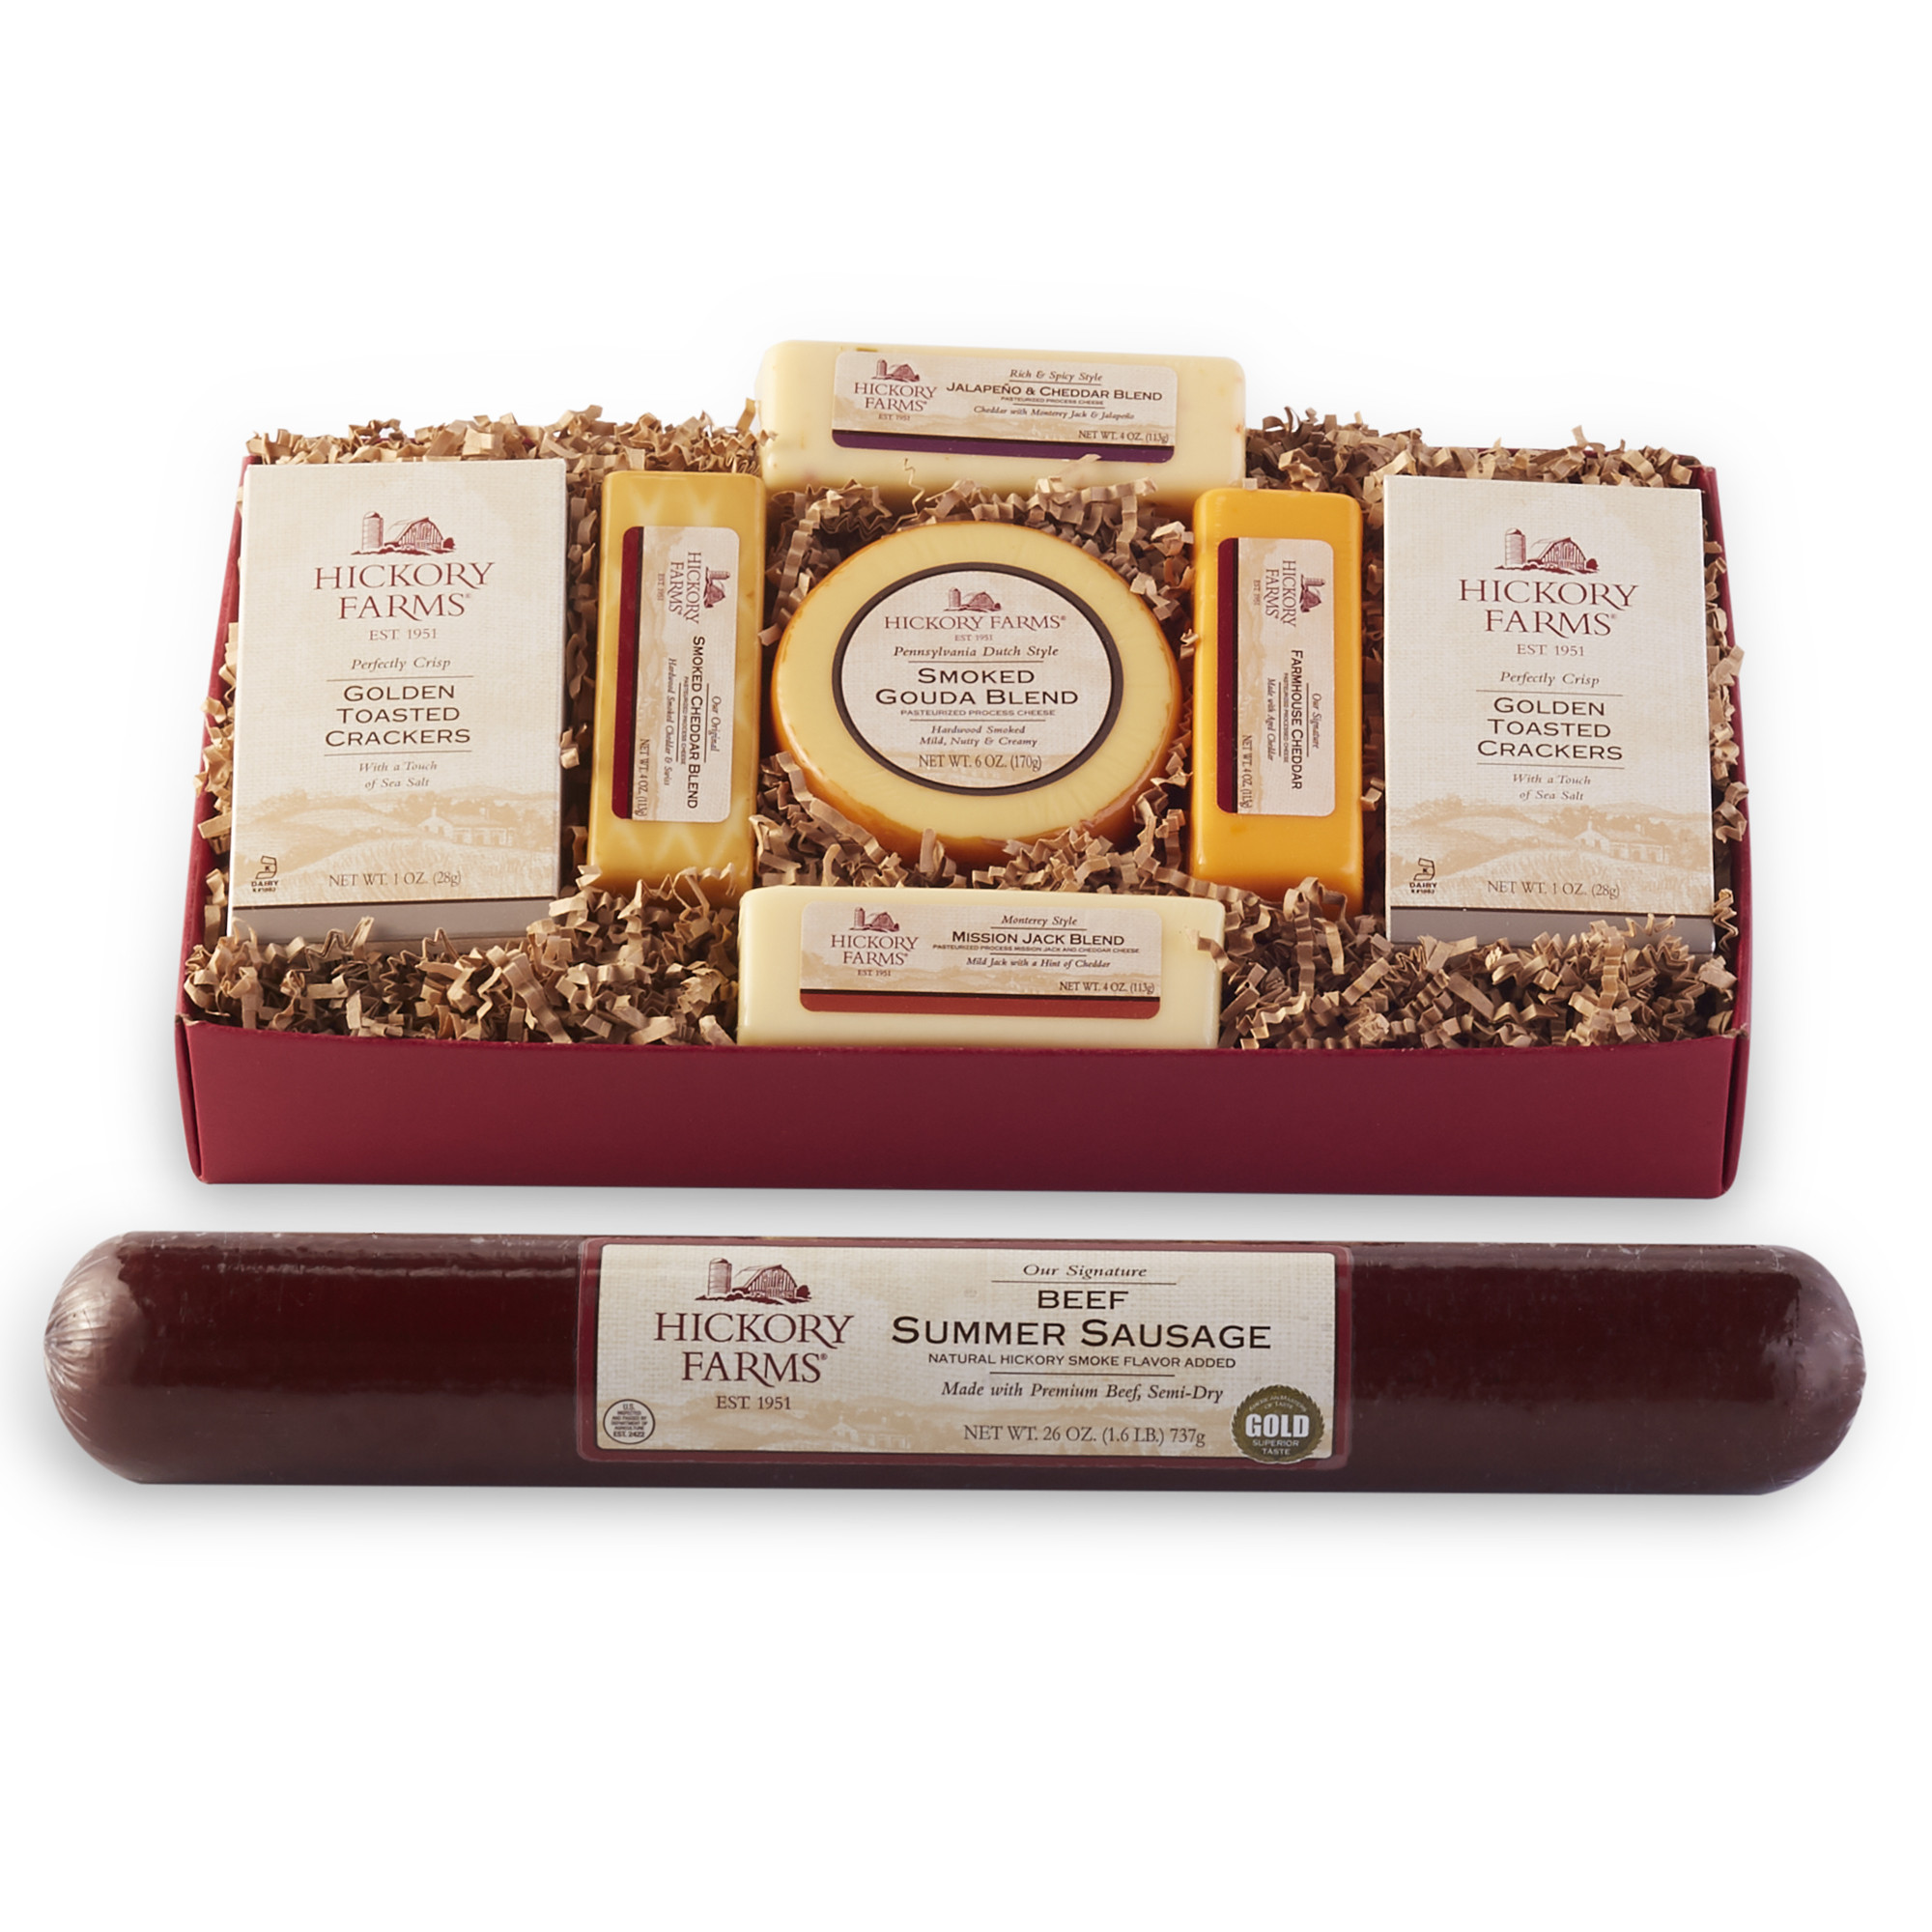 Summer Sausage And Cheese Gift Baskets
 Hickory Farms Party Summer Sausage & Cheese Set